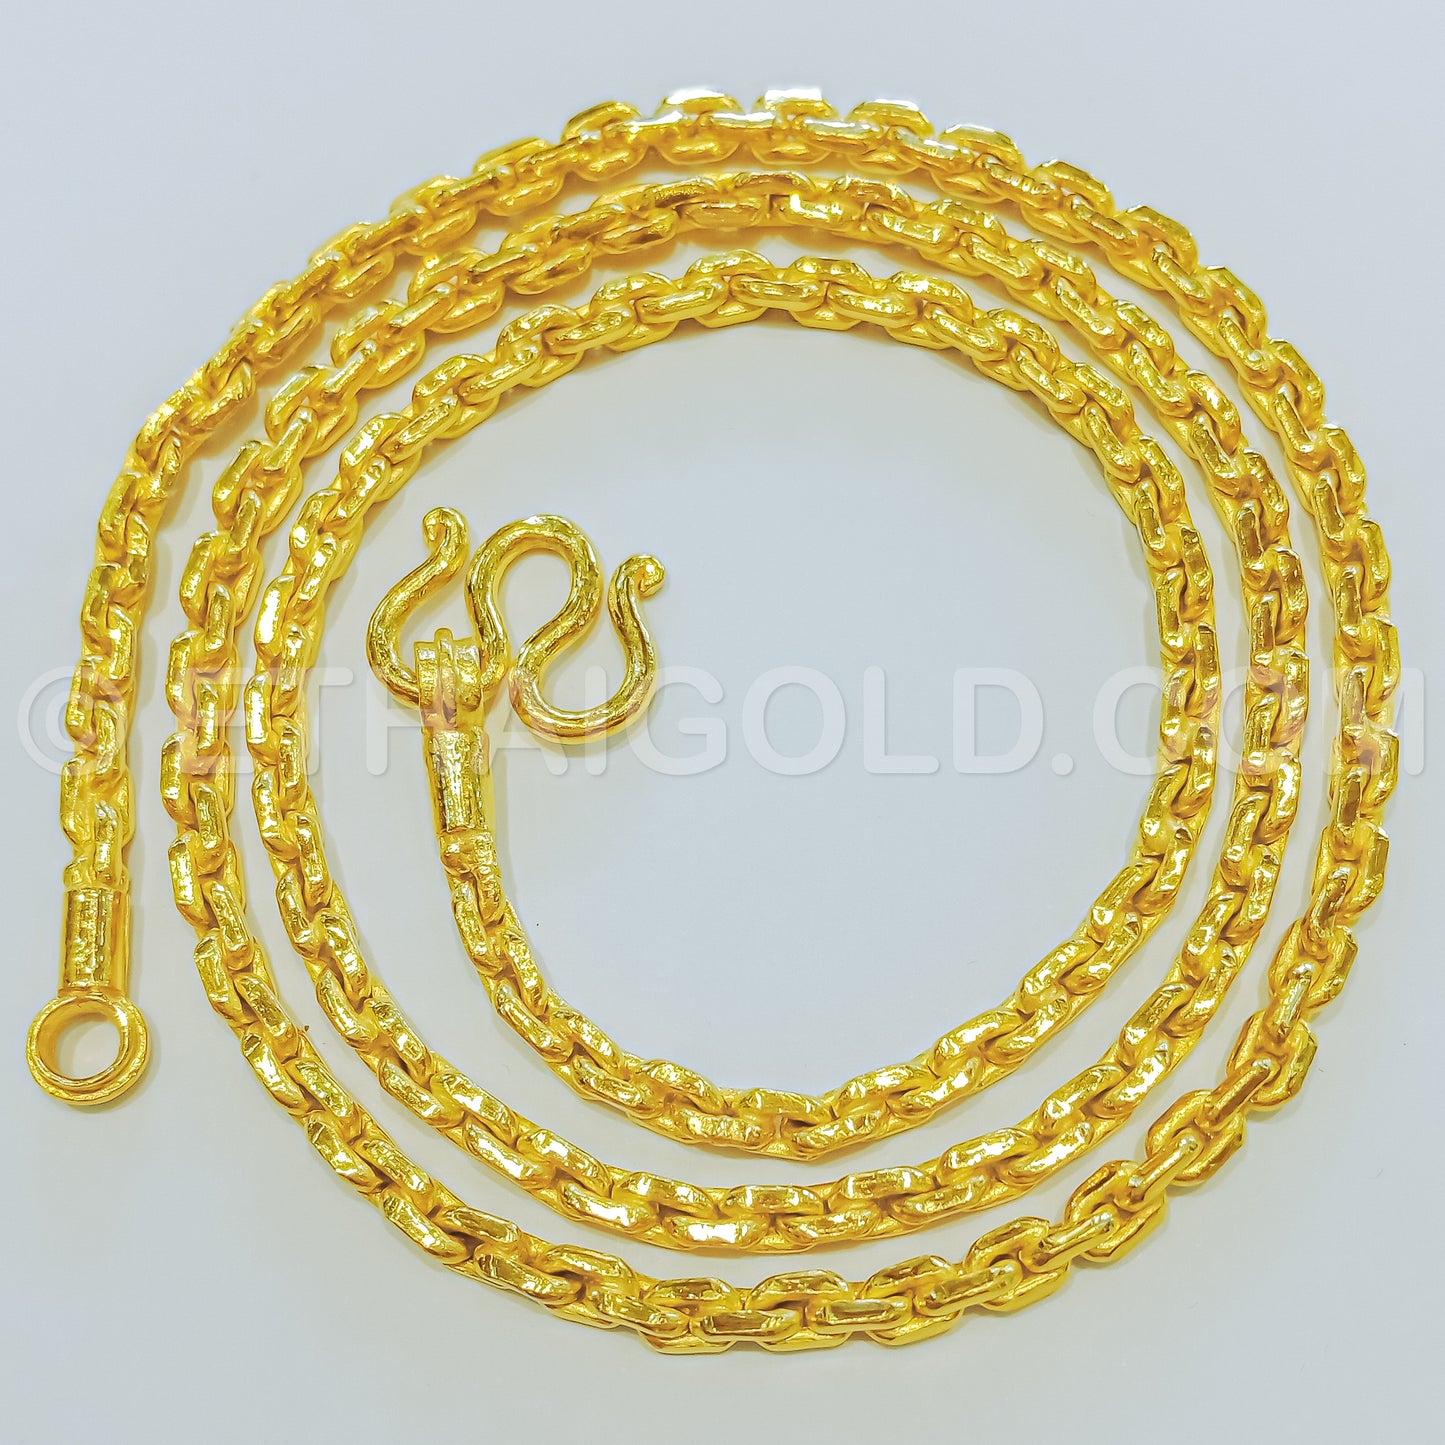 2 BAHT POLISHED SOLID ANCHOR CHAIN NECKLACE IN 23K GOLD (ID: N0302B)